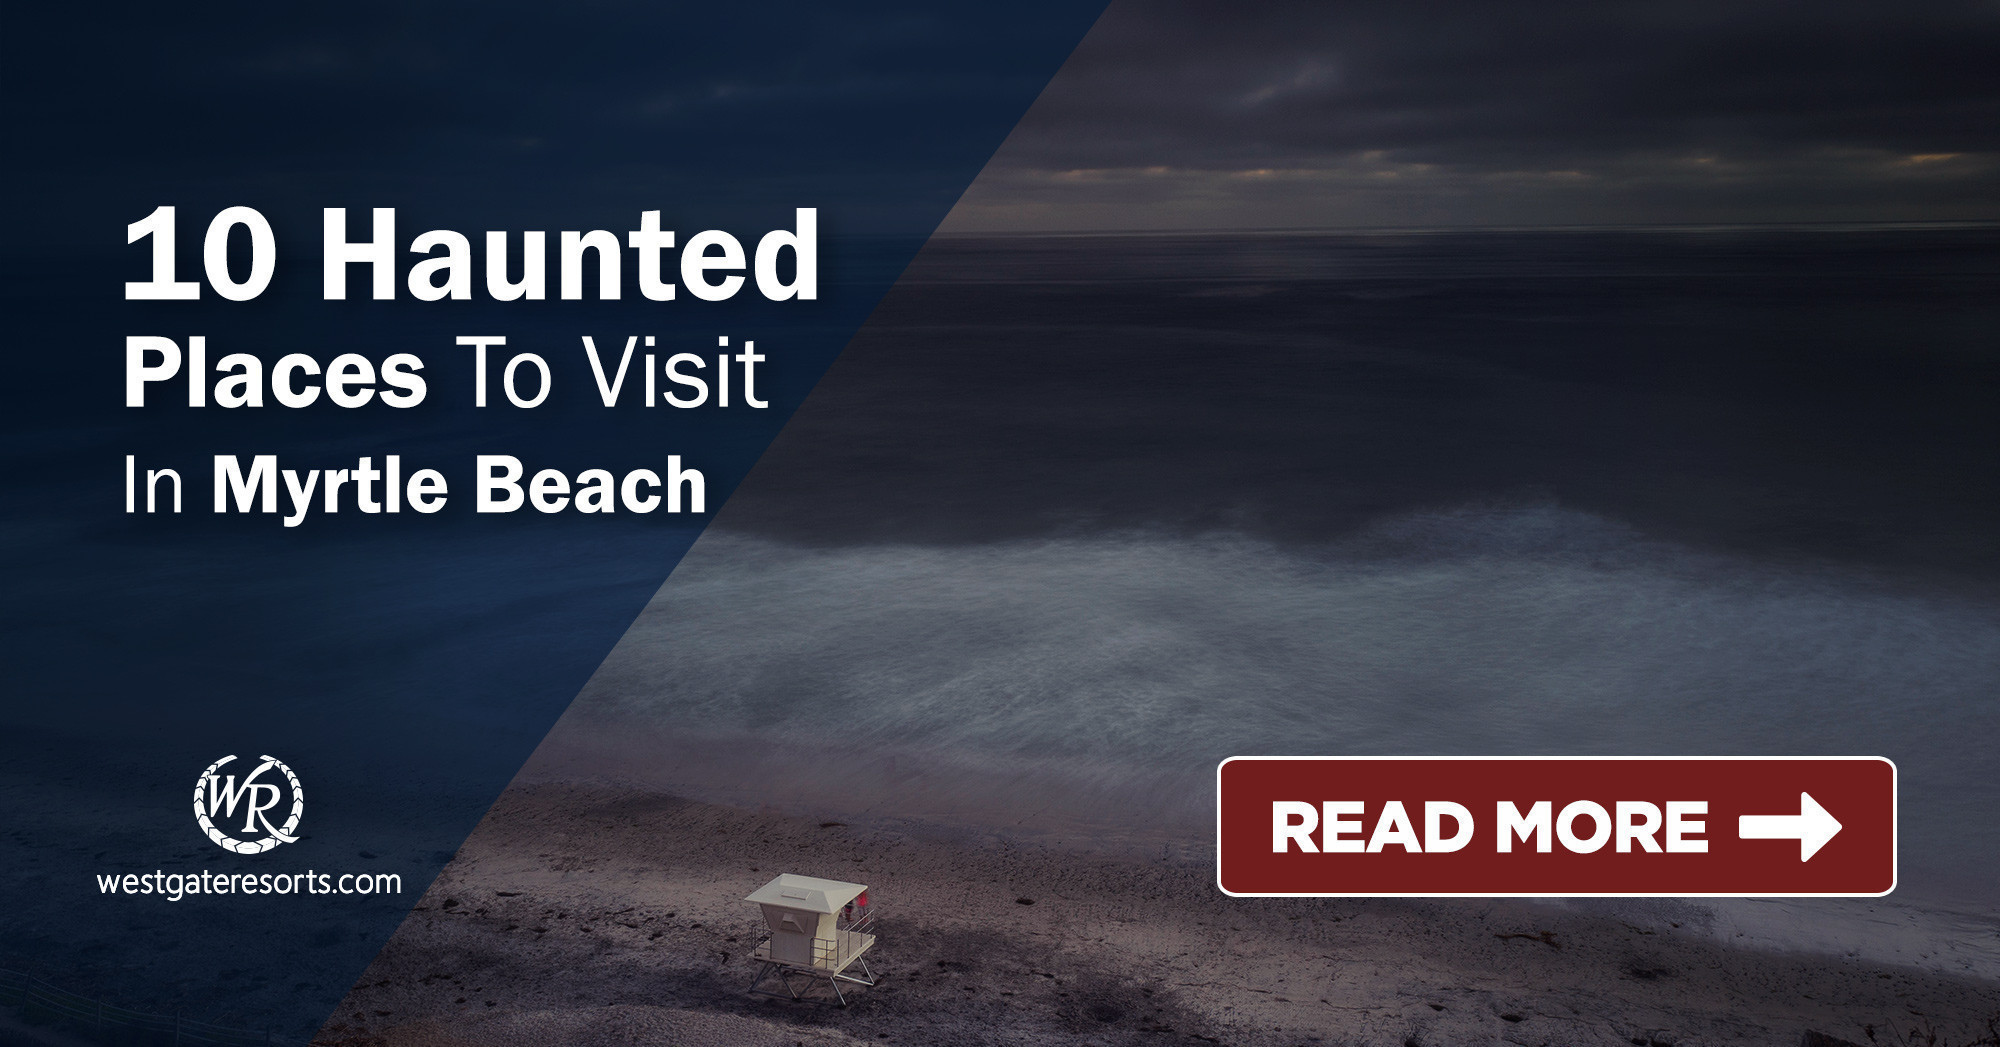 10 Haunted Places To Visit In Myrtle Beach - Haunted Attractions